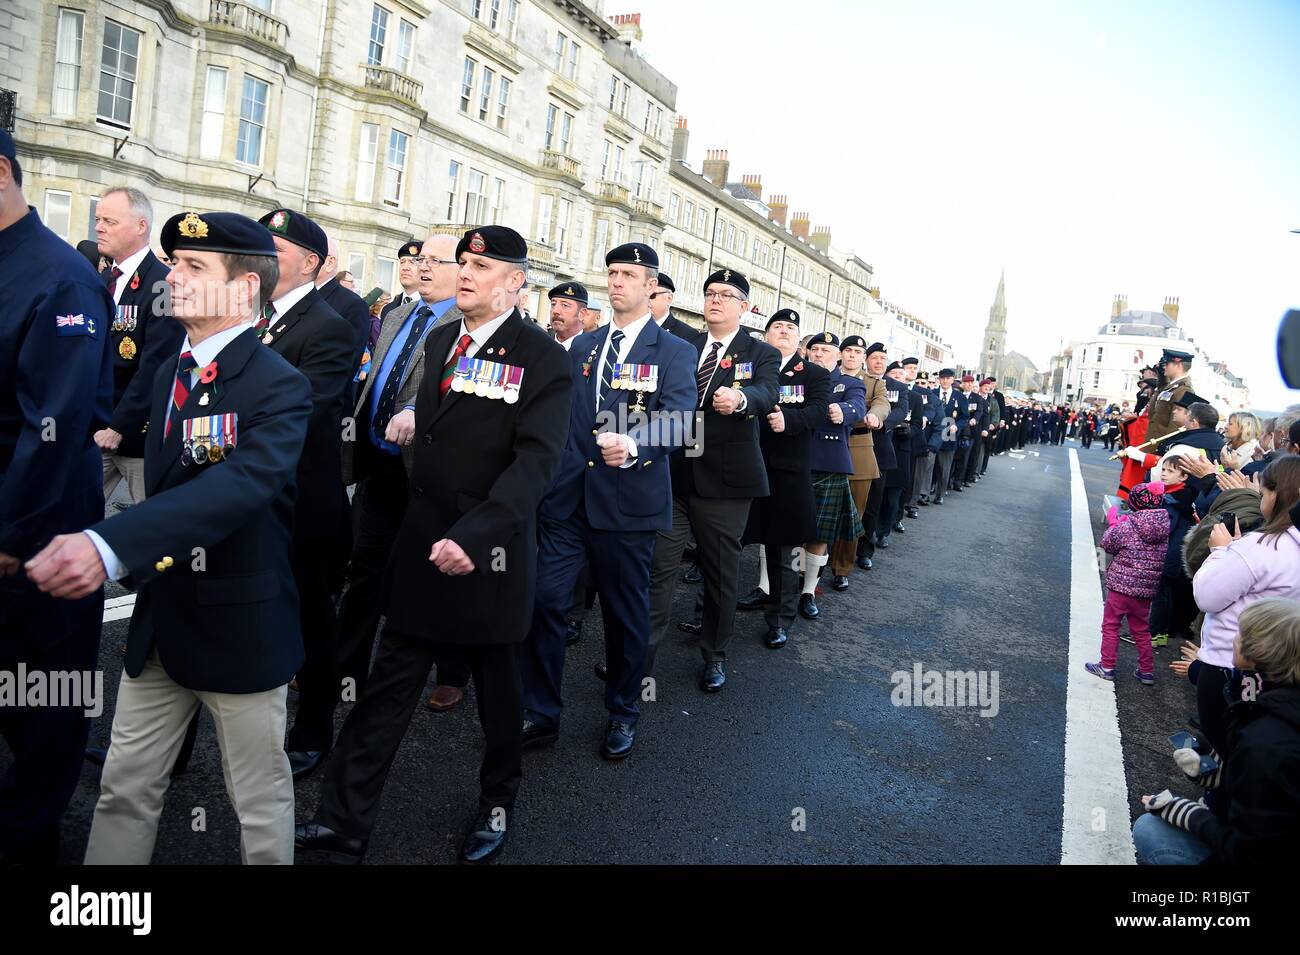 Weymouth, Dorset, UK. 11th Nov, 2018. Remembrance Sunday service and parade in Weymouth, Dorset, UK Credit: Finnbarr Webster/Alamy Live News Stock Photo